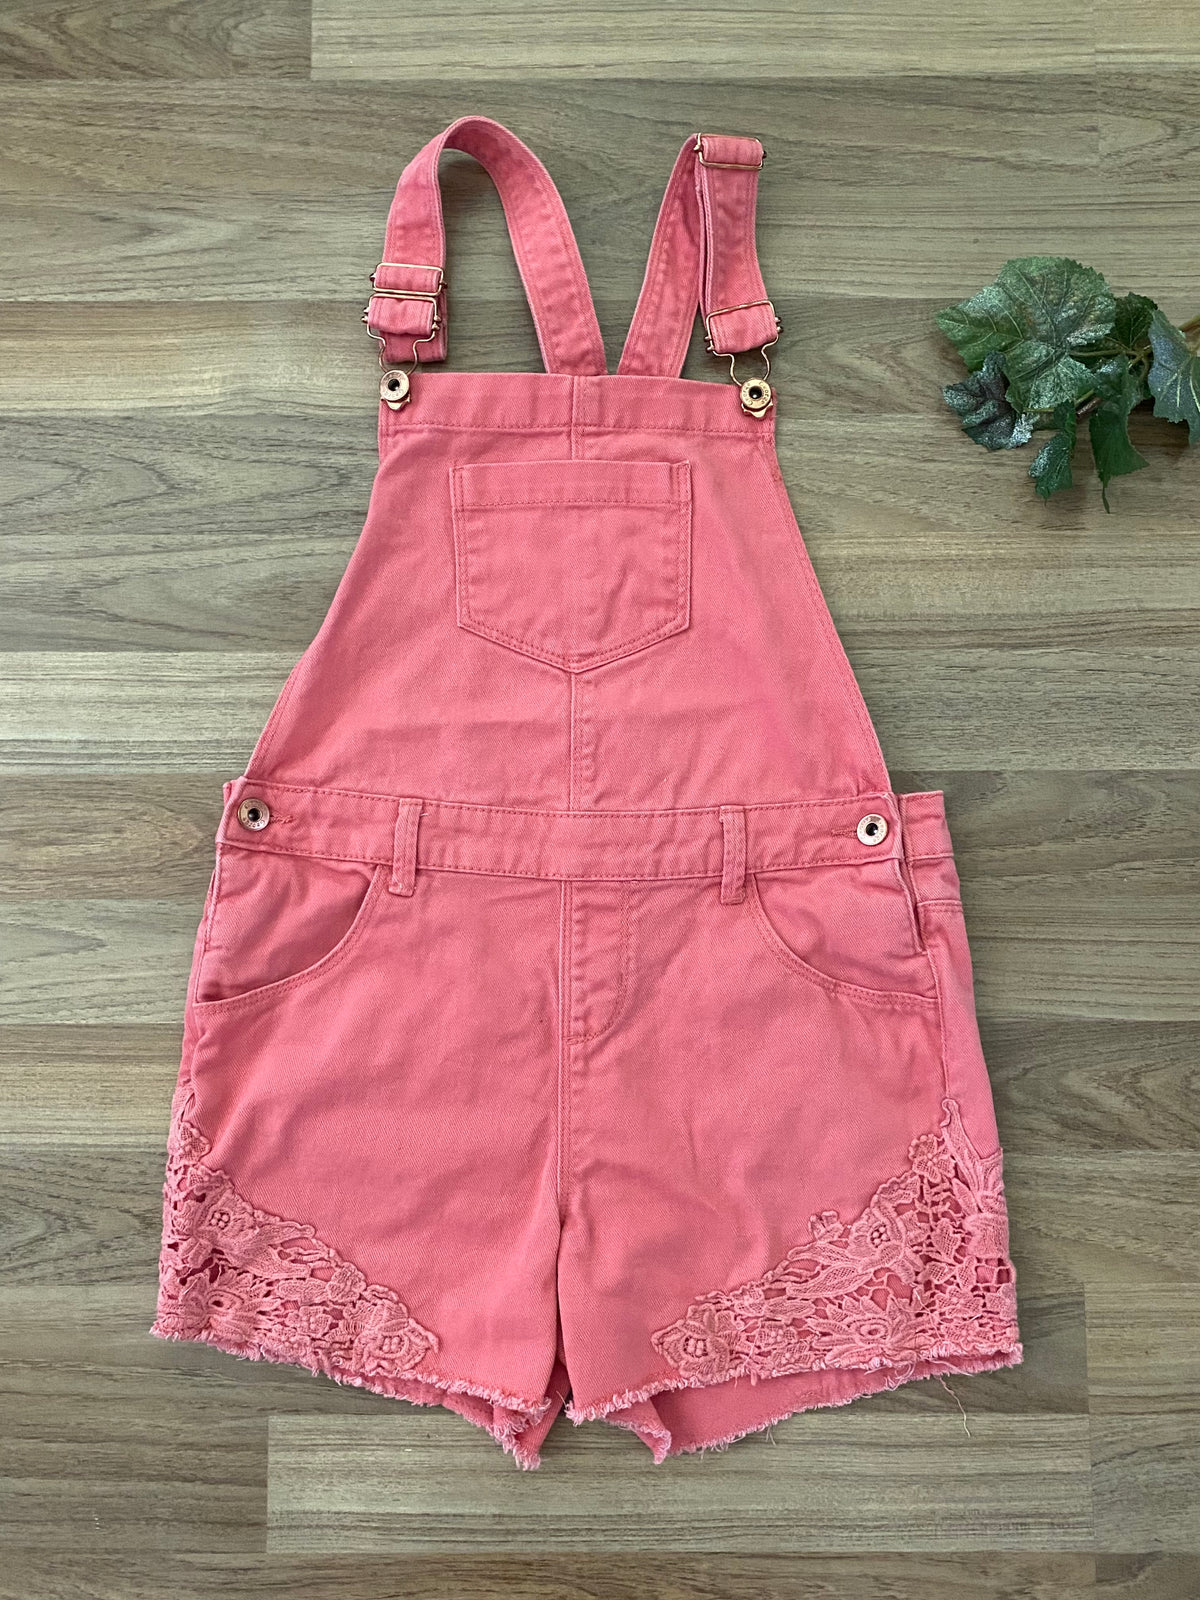 Overalls (Girls Size 14)